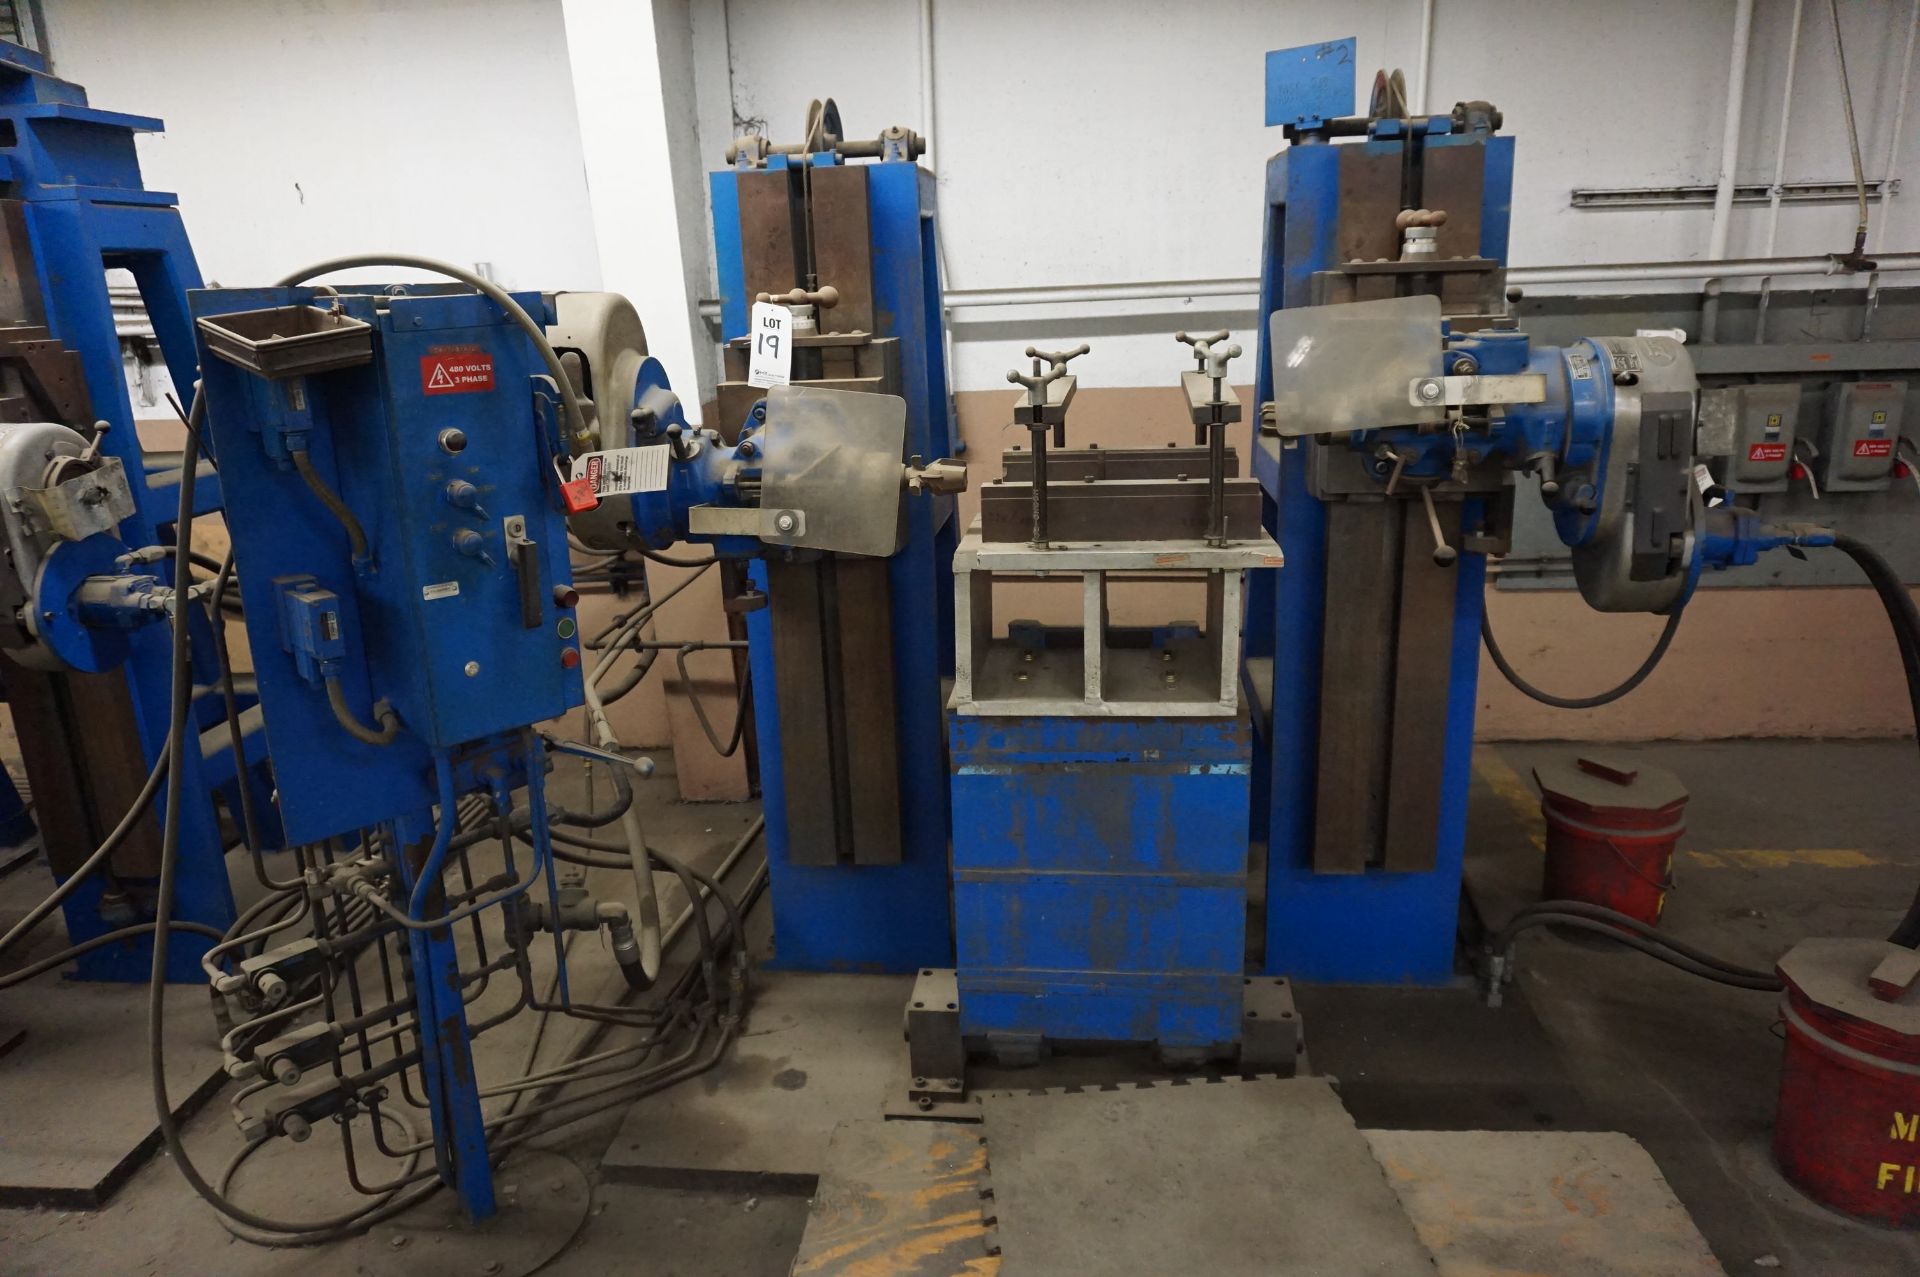 MACHINE ASSEMBLY TO INCLUDE: (2) BRIDGEPORT MILLING HEADS, PULLEY SYSTEM AND TRACKS, CONTROL, 480